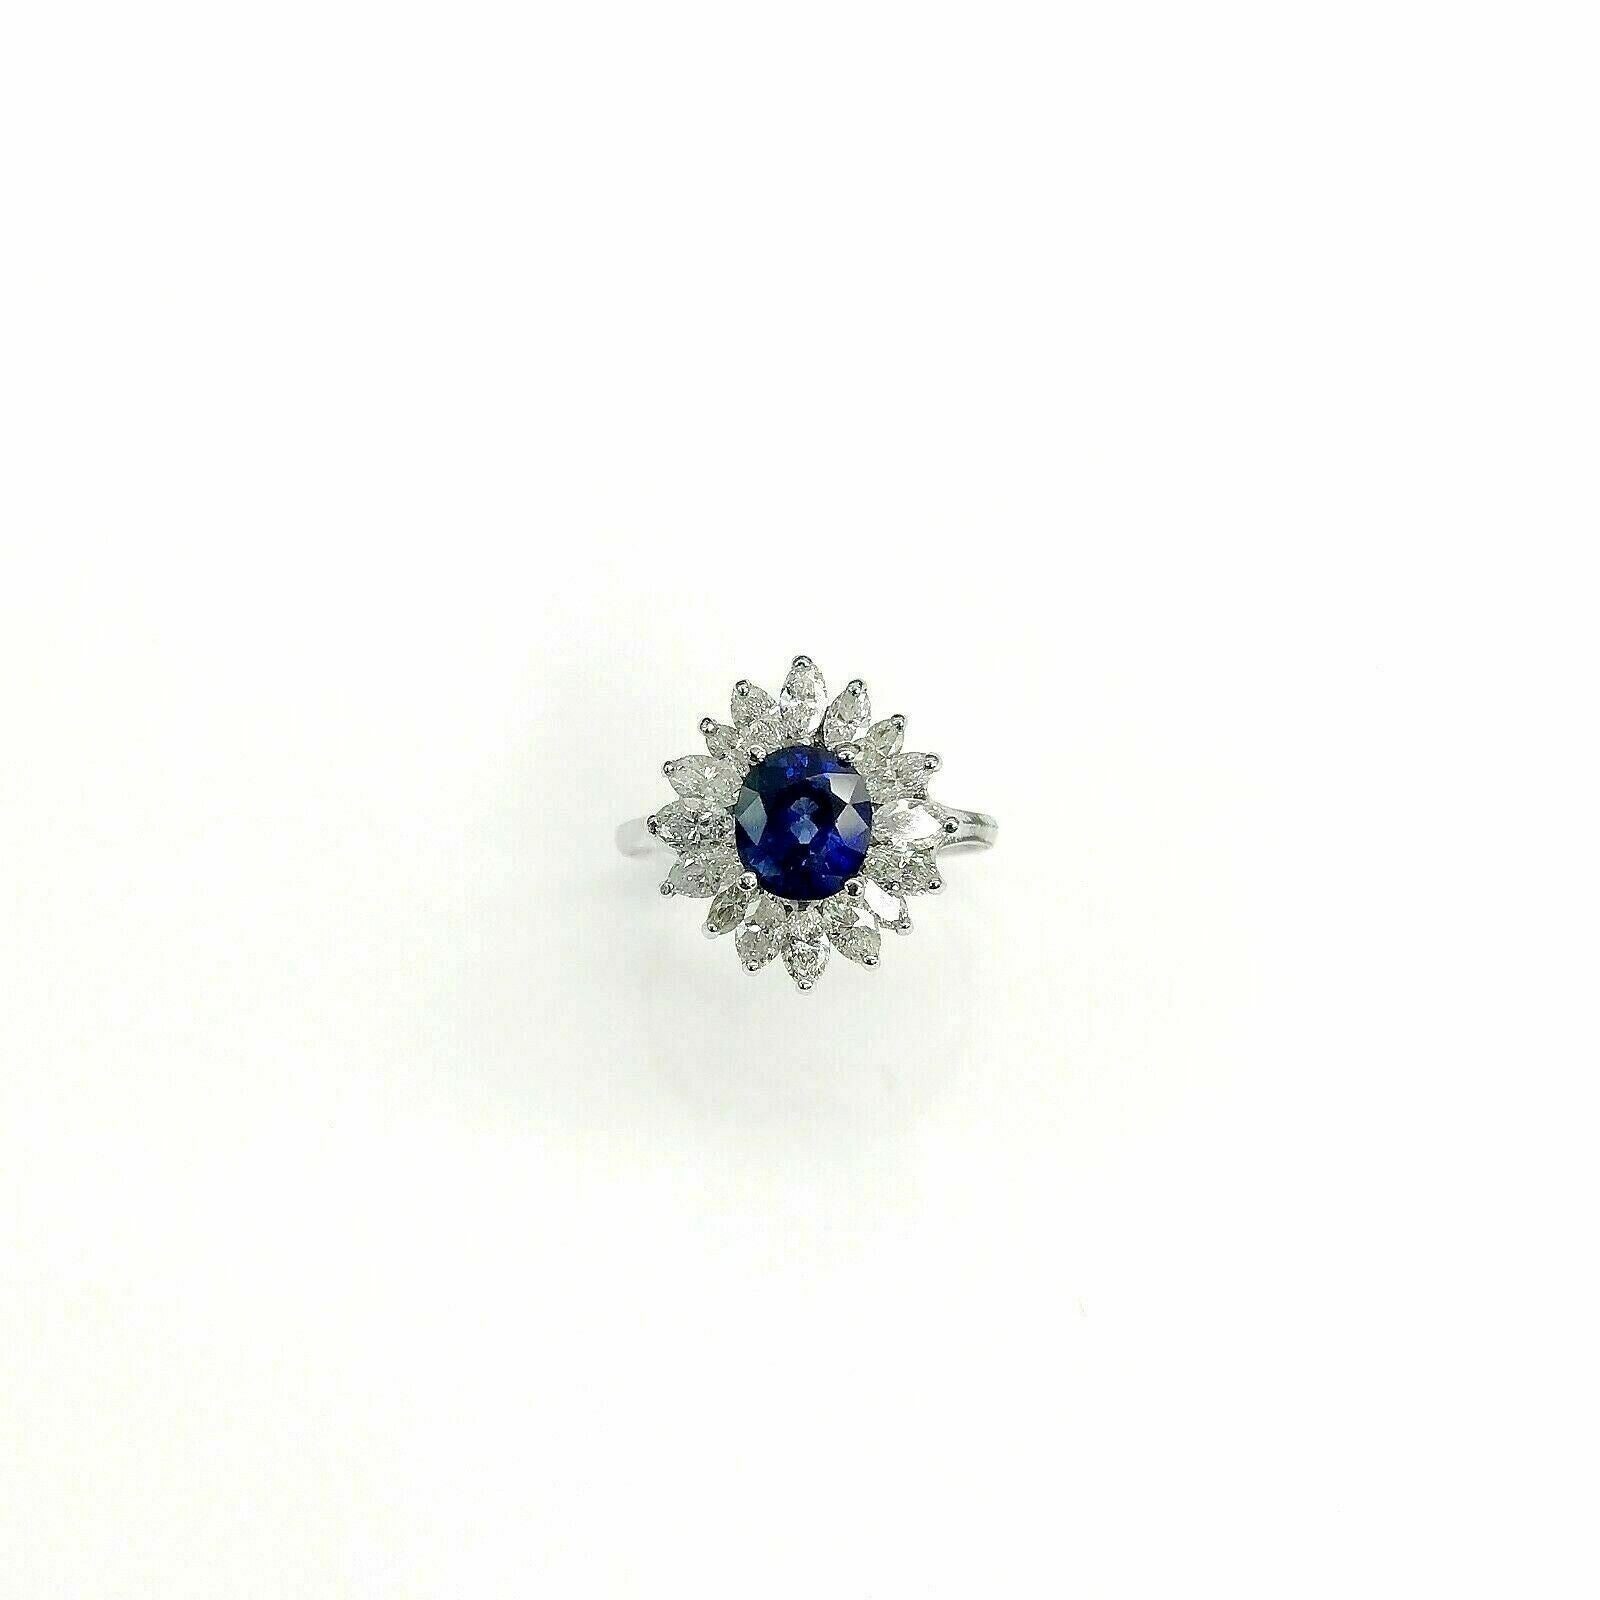 2.60 Carats t.w. Diamond and Sapphire Cocktail Ring 14K Gold 1.20 Carat Sapphire